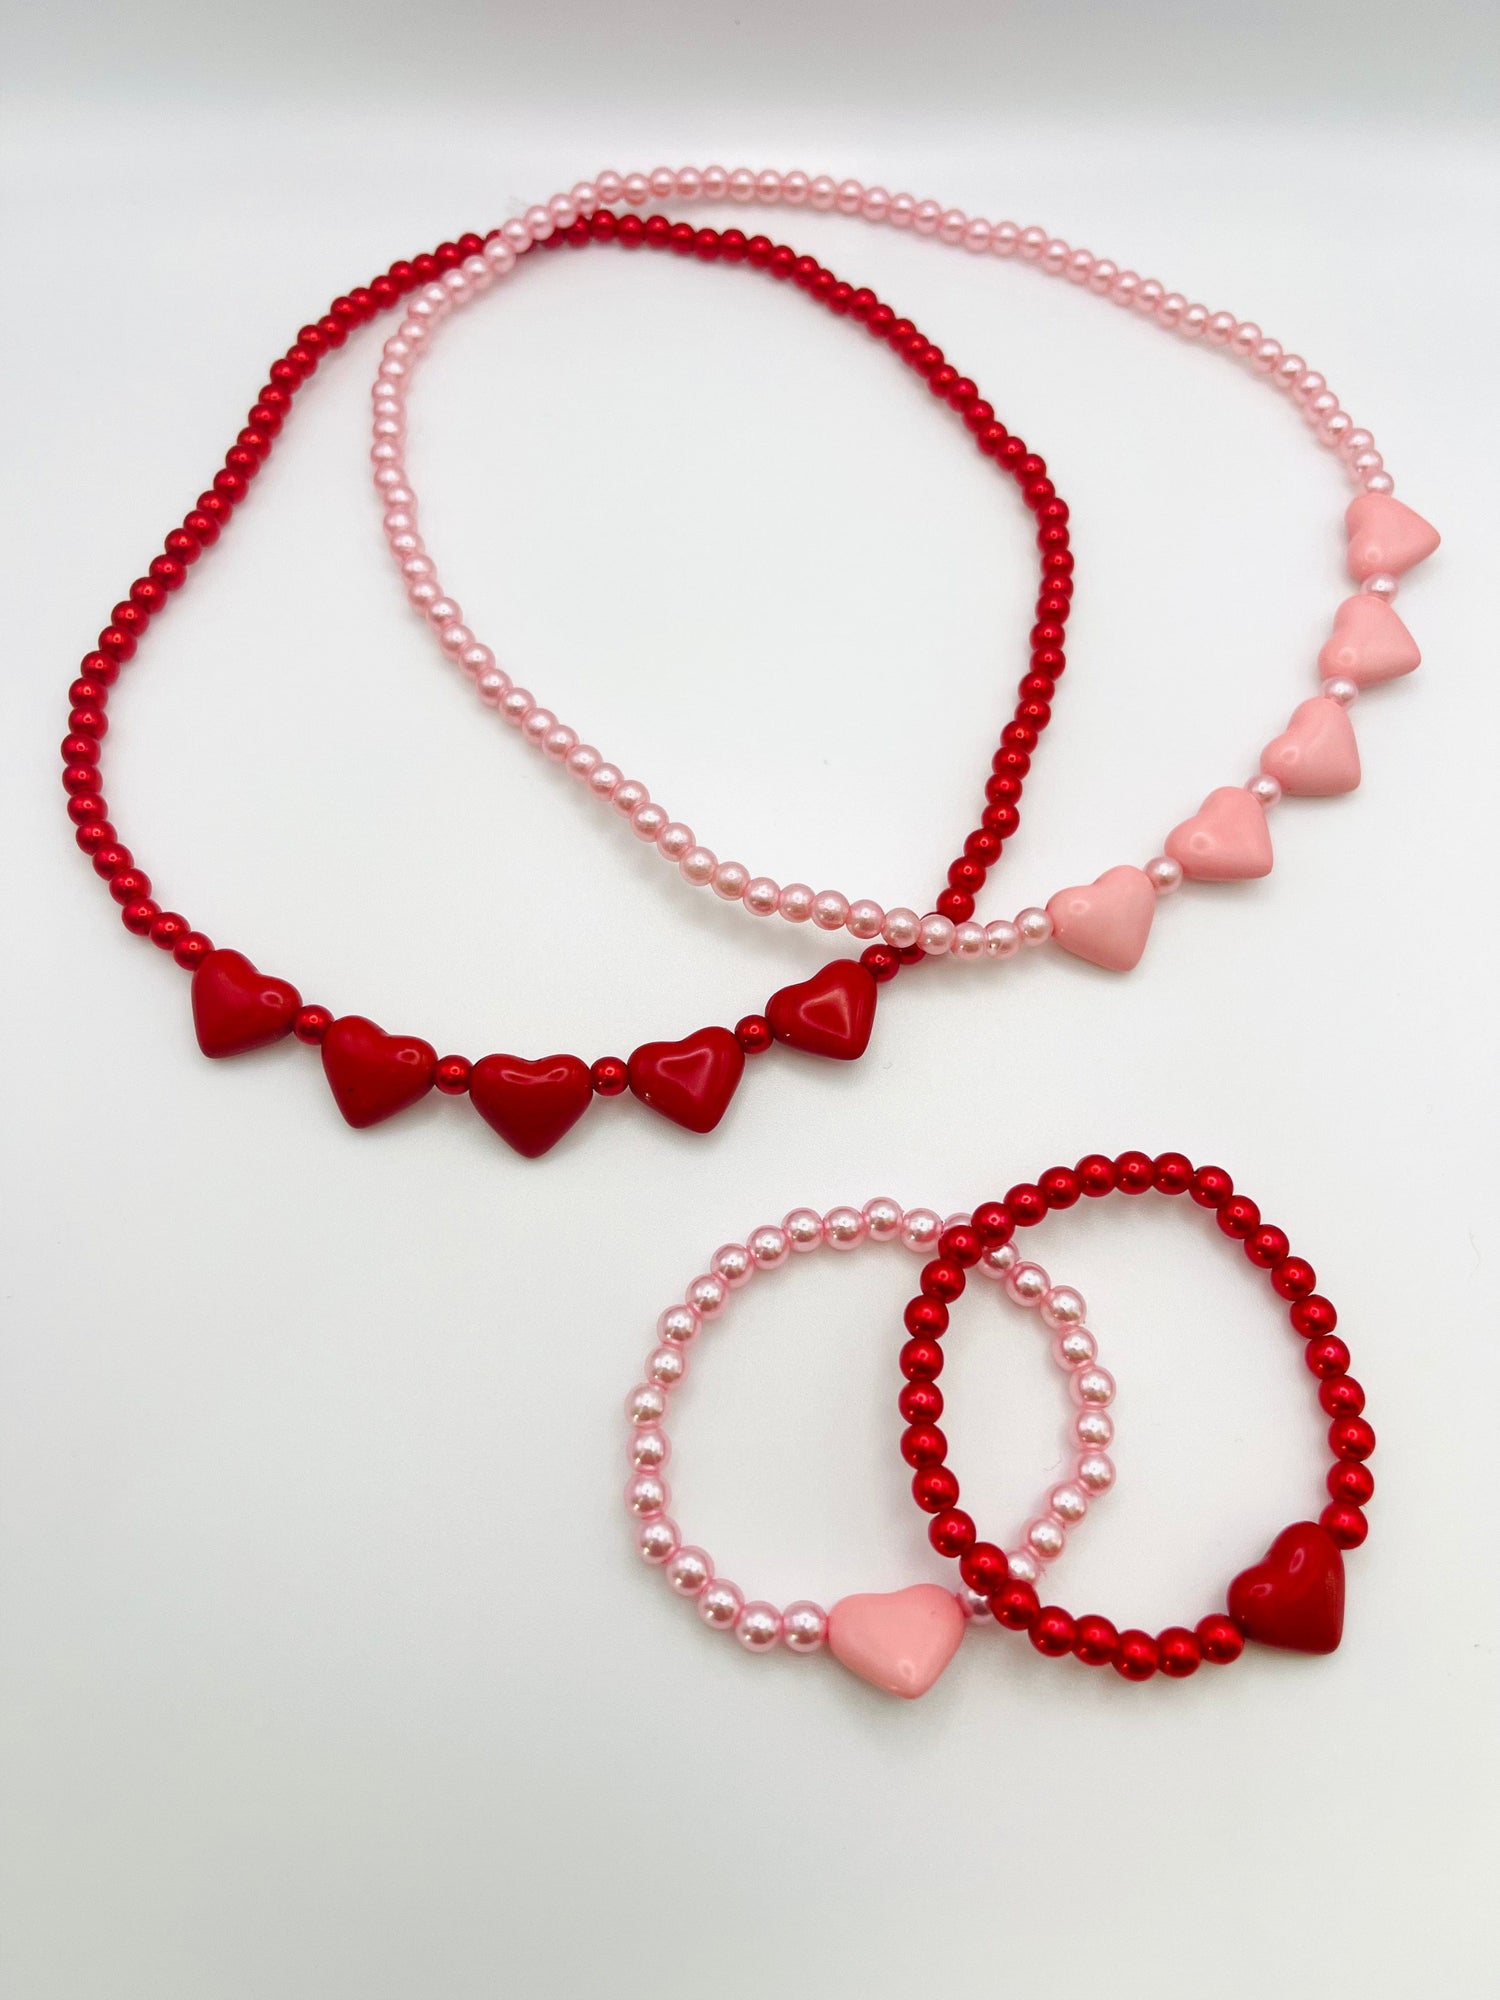 Fashionably, BBK! Accessories Girls Beaded Heart Necklace and Bracelet Set